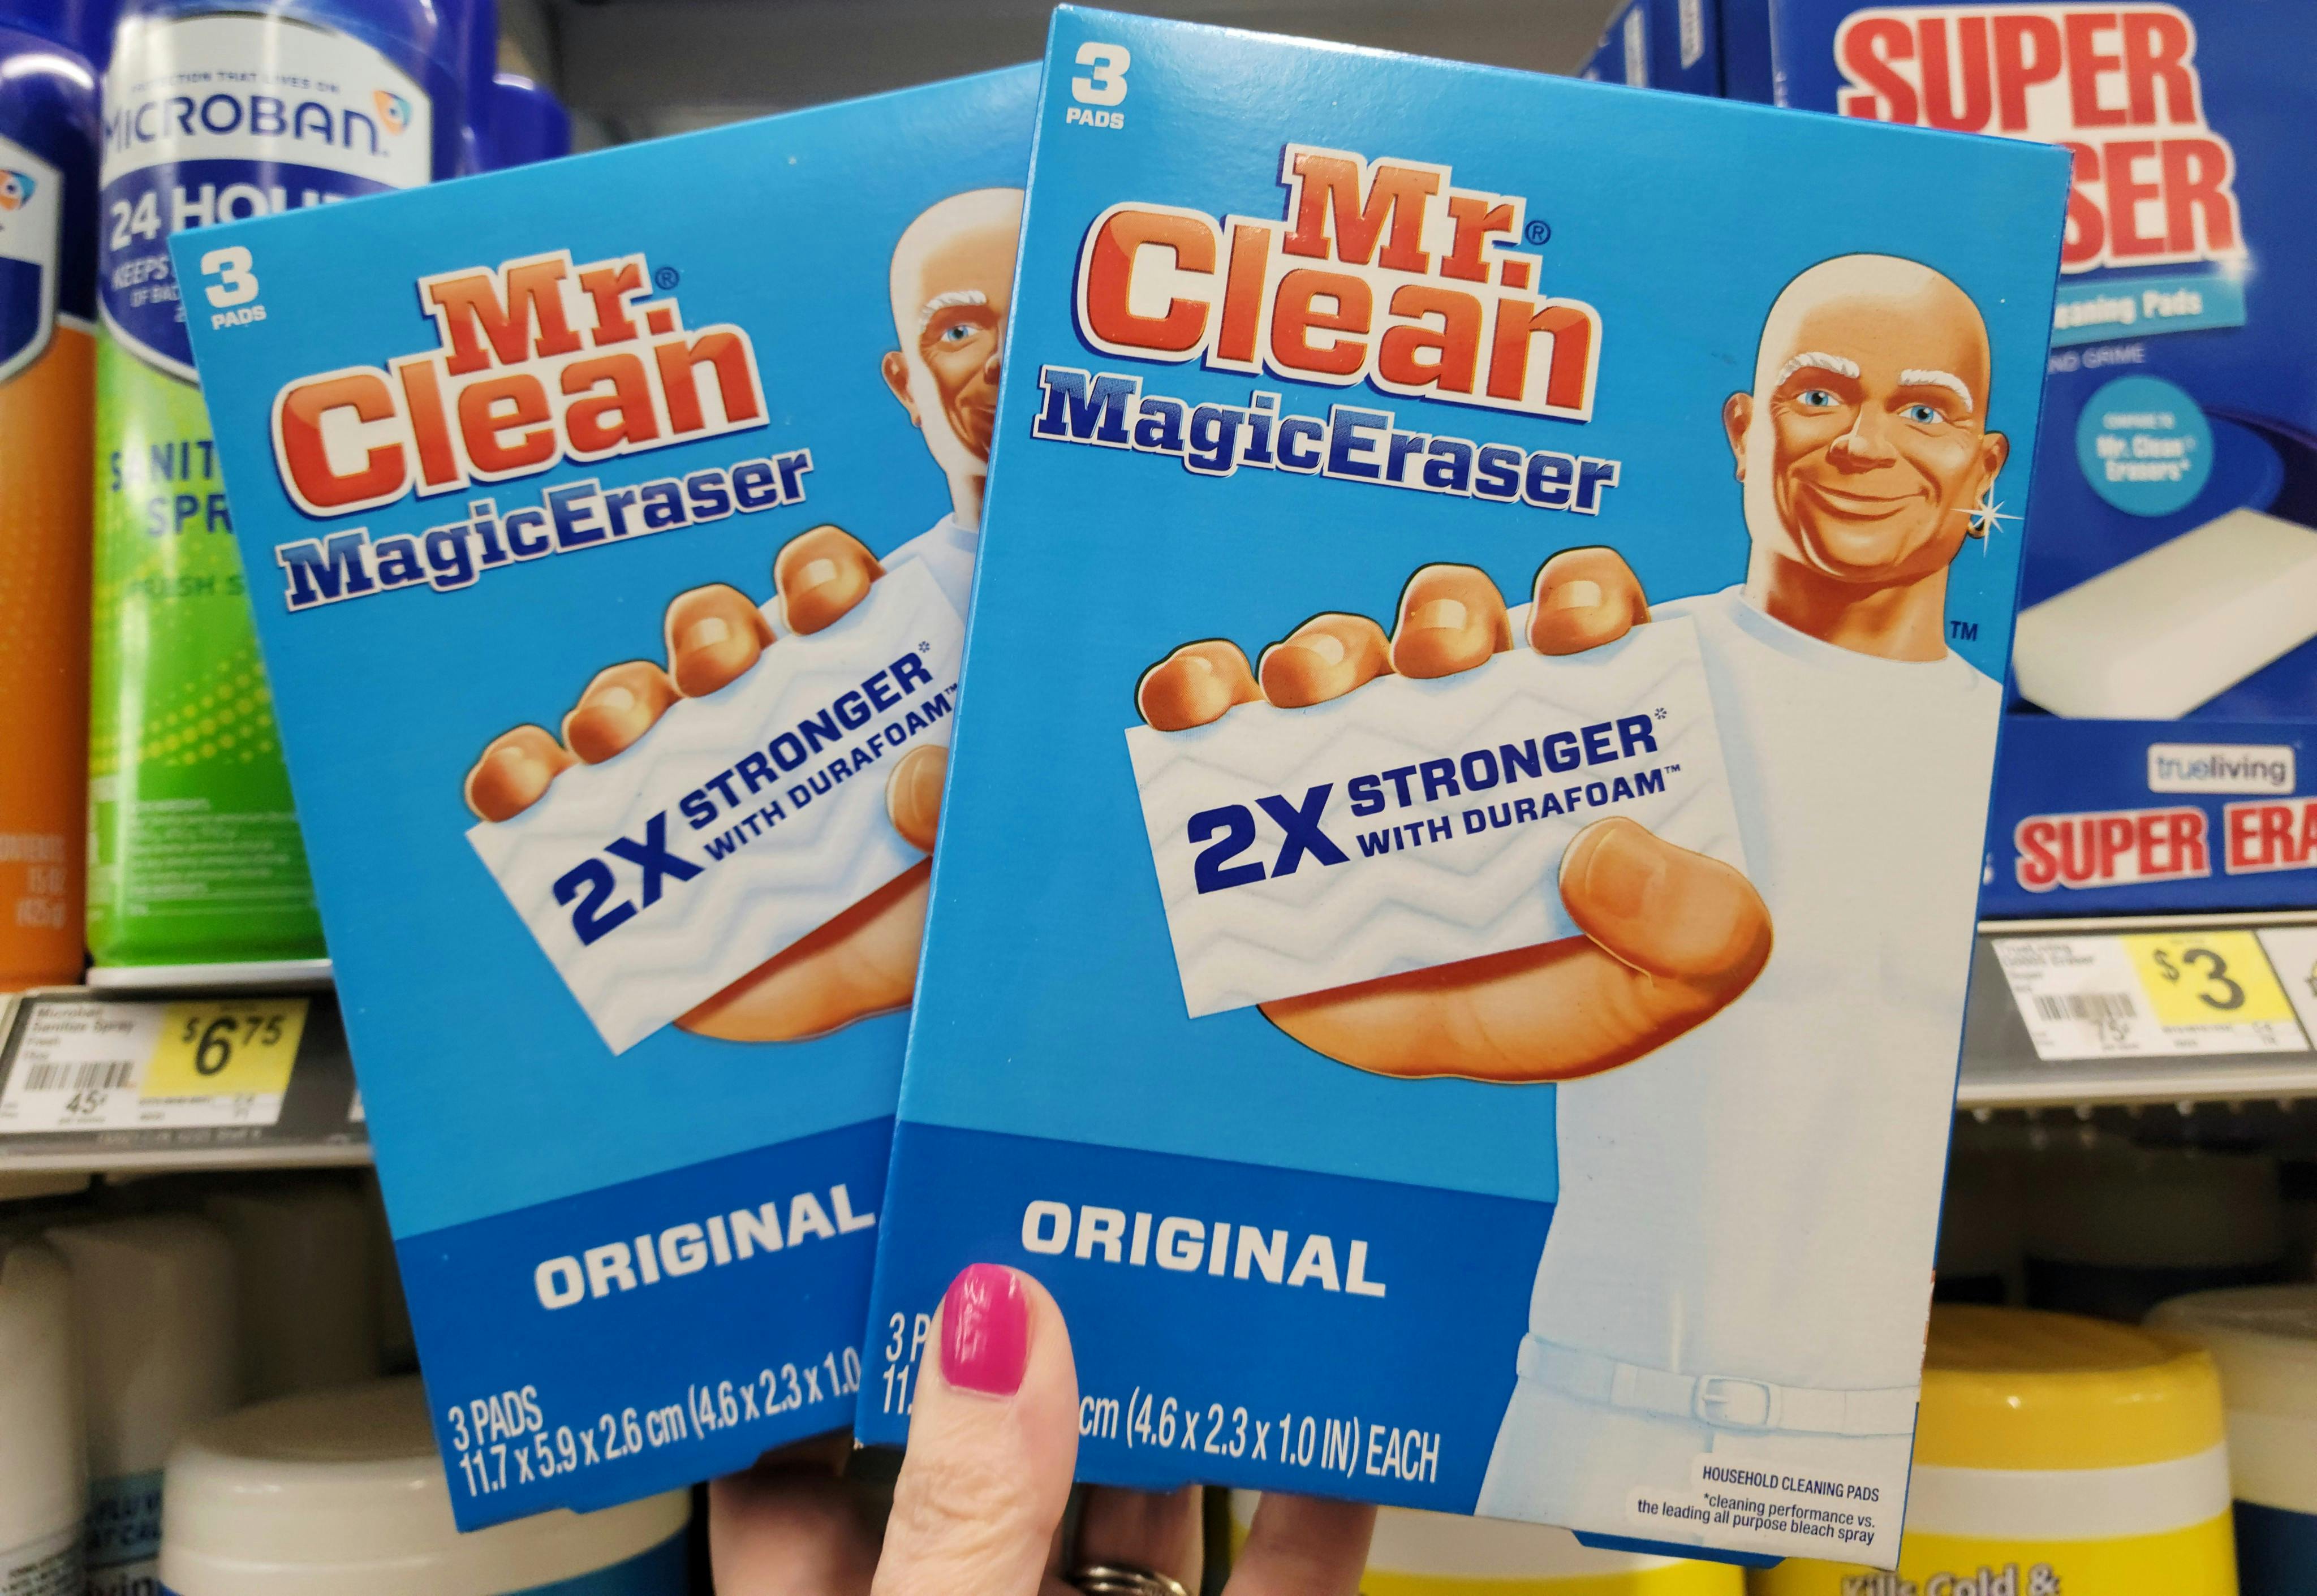 Mr. Clean Products, as Low as $1.25 at Dollar General - The Krazy ...